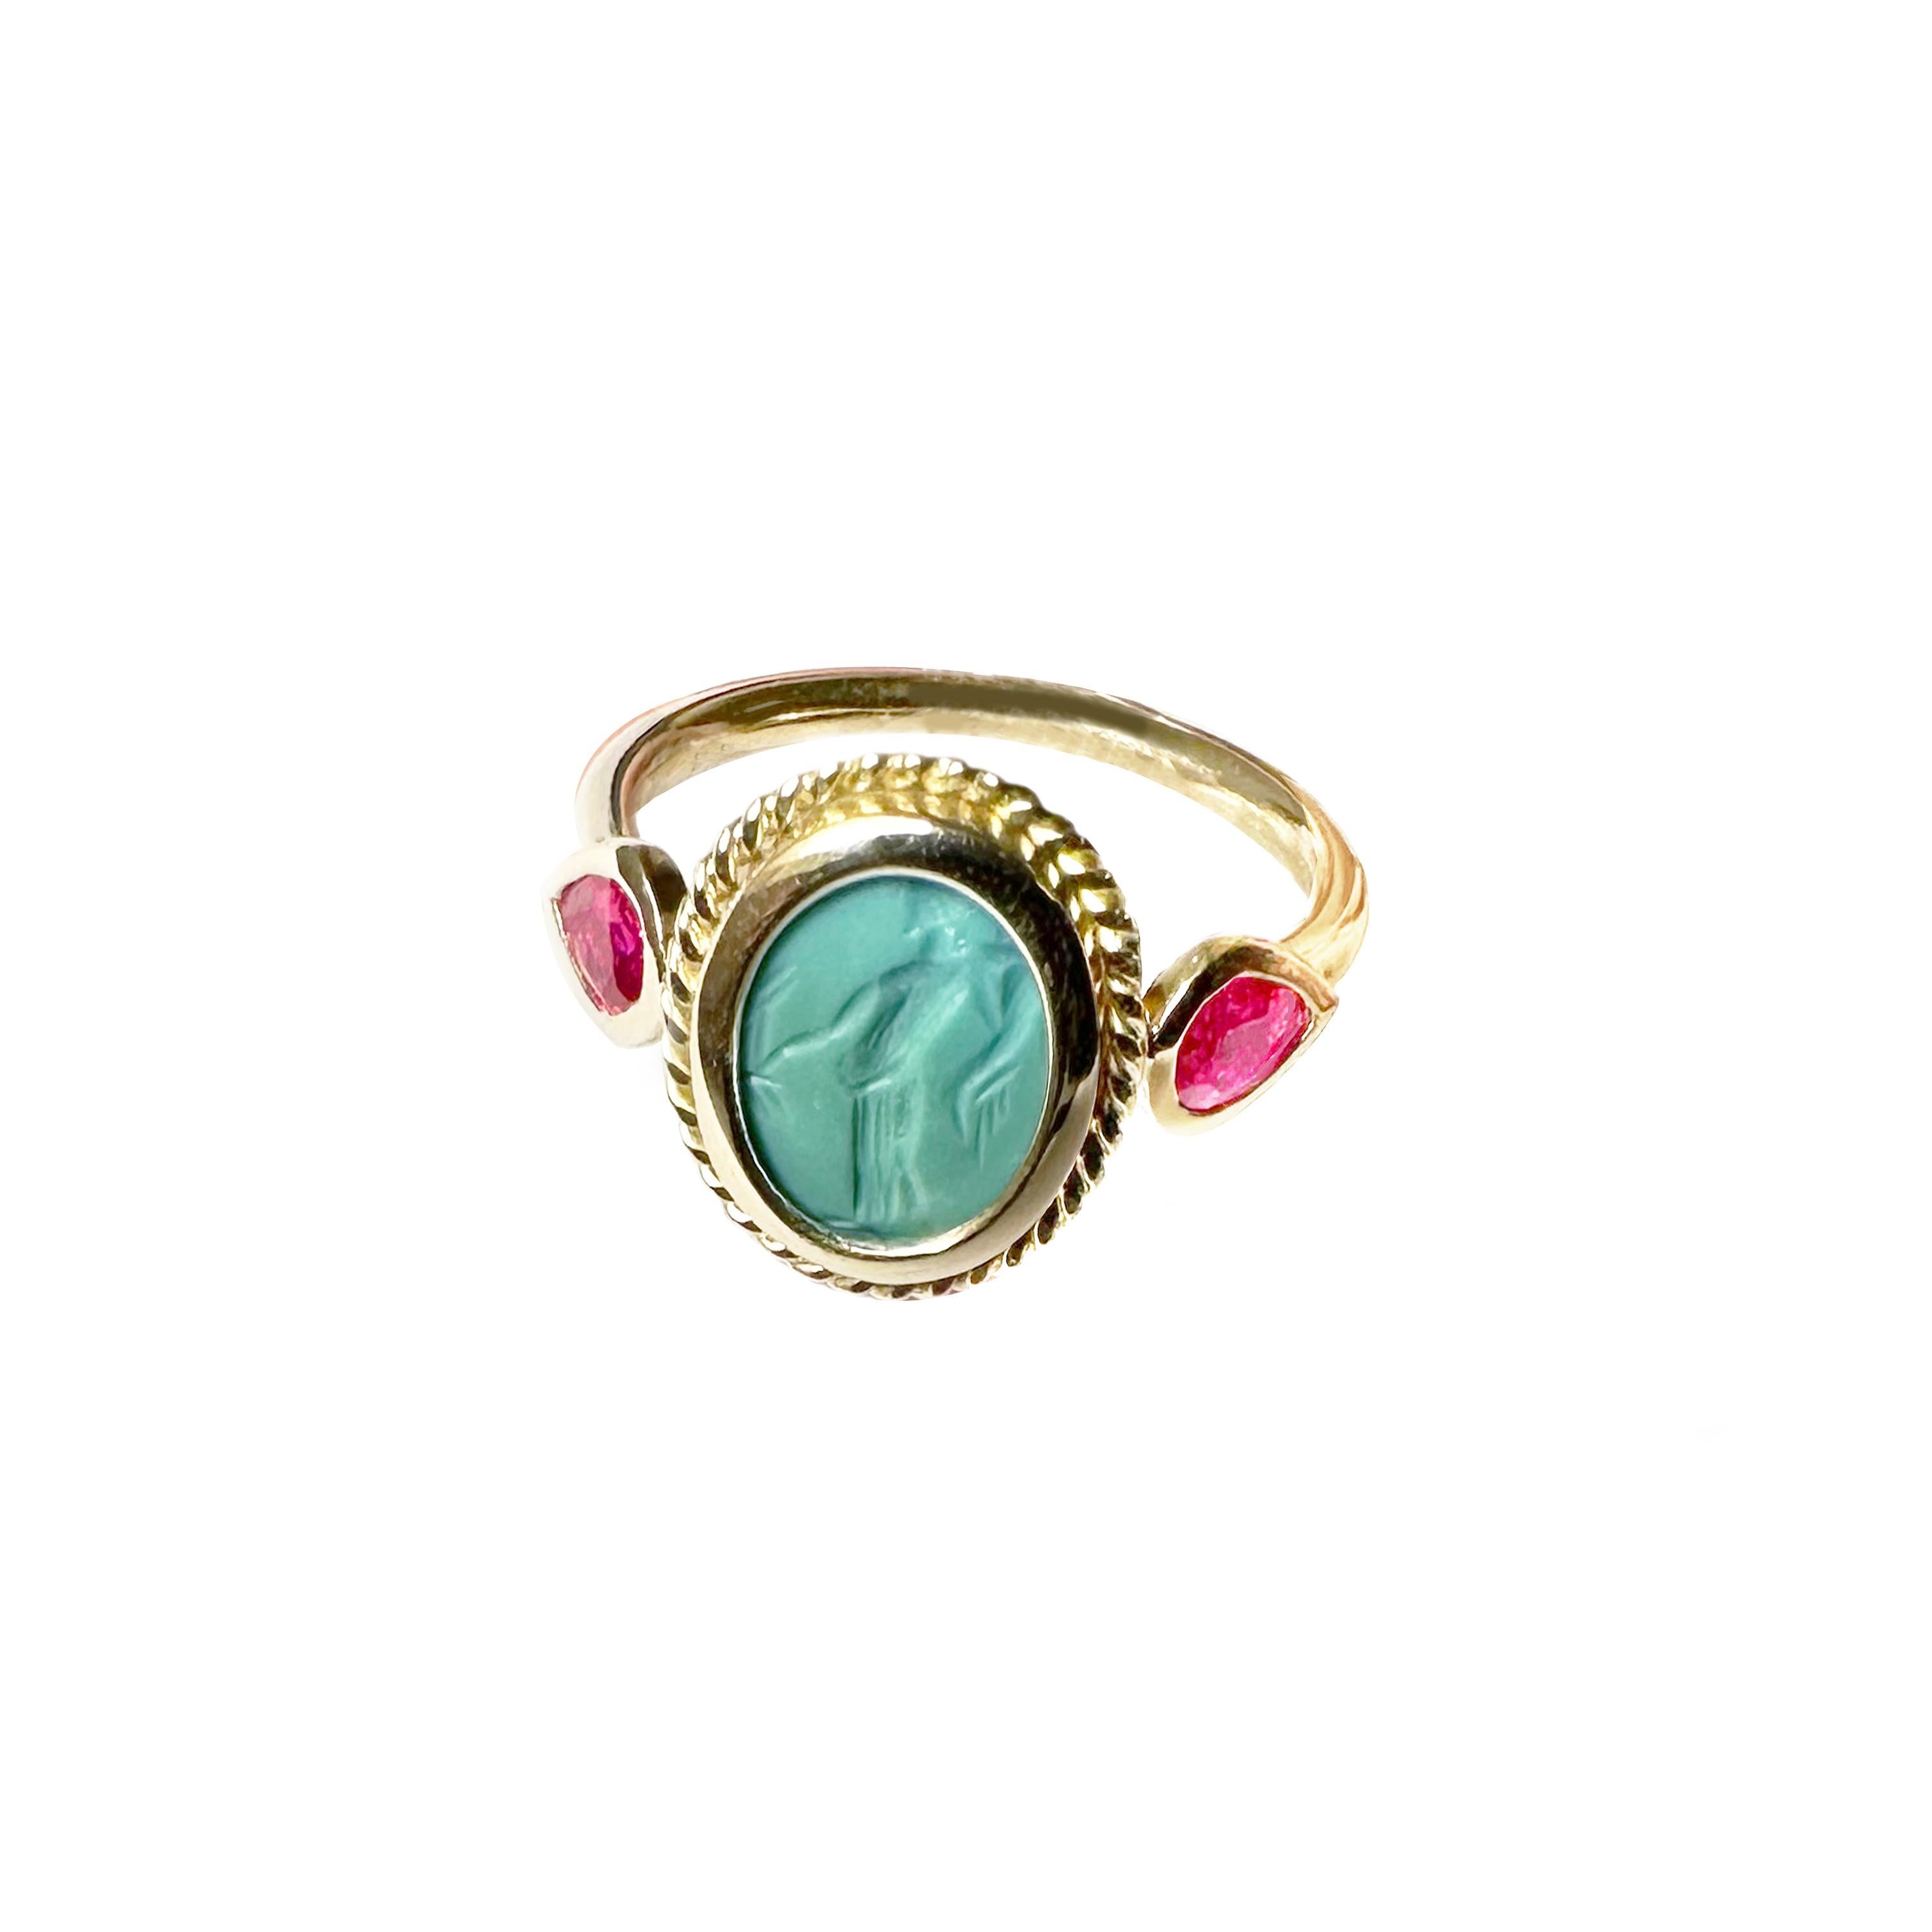 In this 18 kt gold ring, handmade by a skilled italian goldsmith, a Roman turquoise from the 1st century AD is set, in which the goddess Fortuna was engraved more than 2000 years ago. She holds in her hands her classic attributes: Cornucopia and